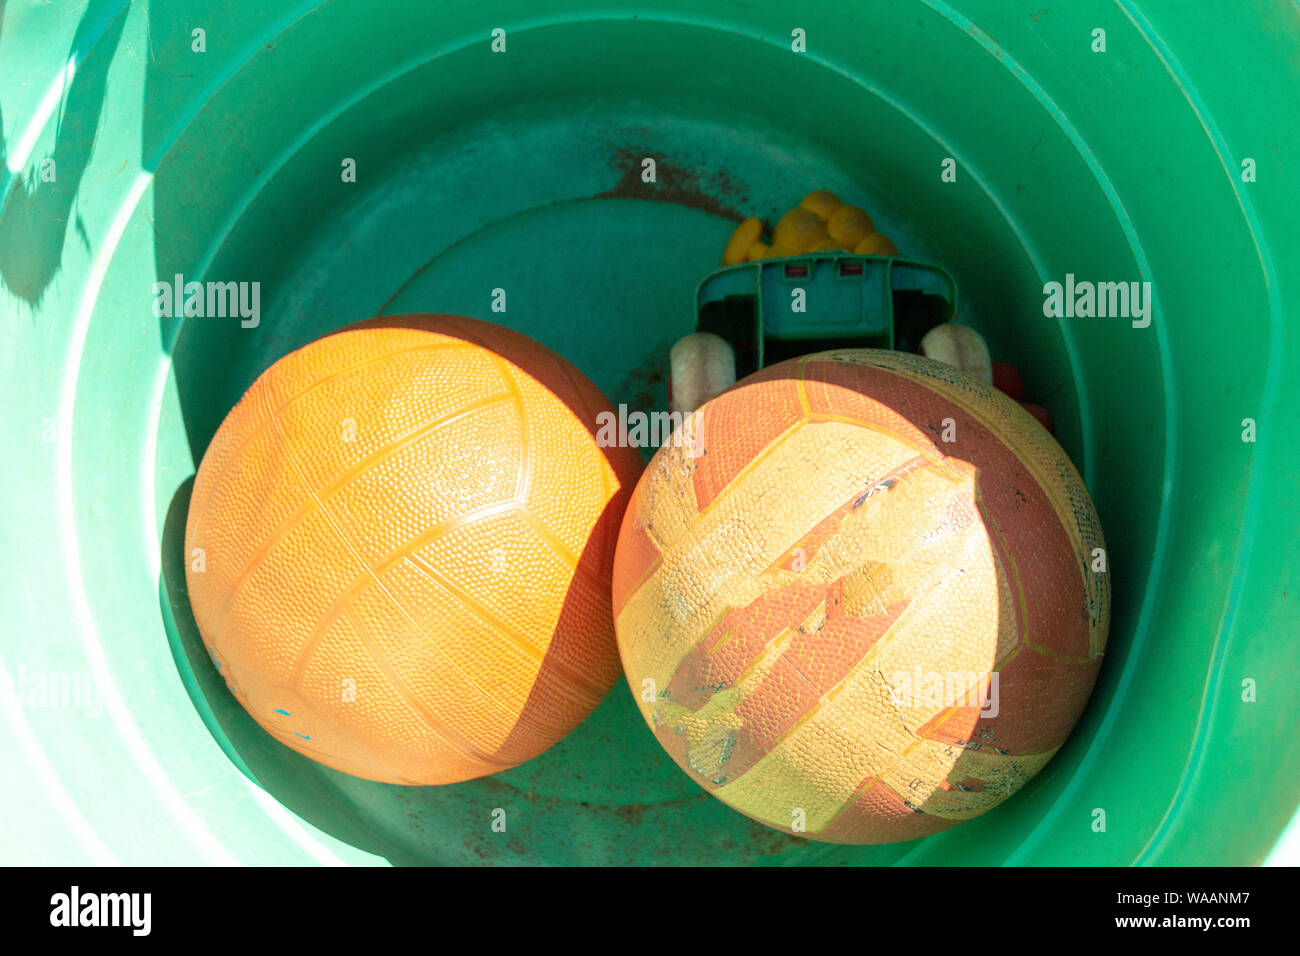 A close up view of rugby, soccor balls in a orange plastic bucket Stock Photo